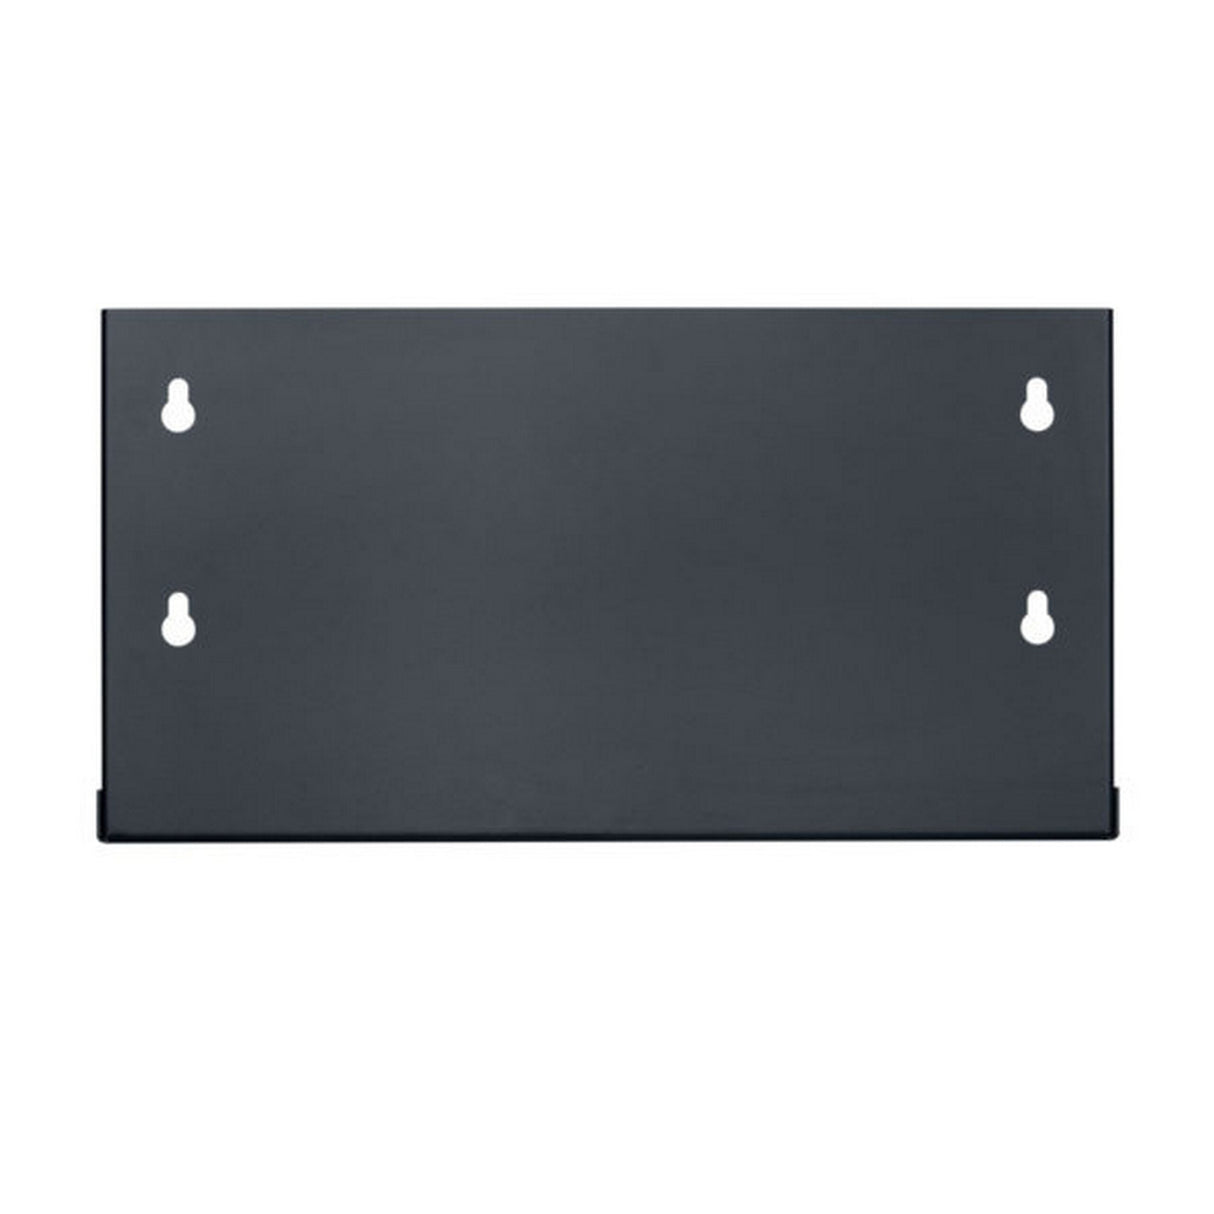 Lowell WMS-CPU-4 Shelf for Computer Tower, 4-Inch Depth